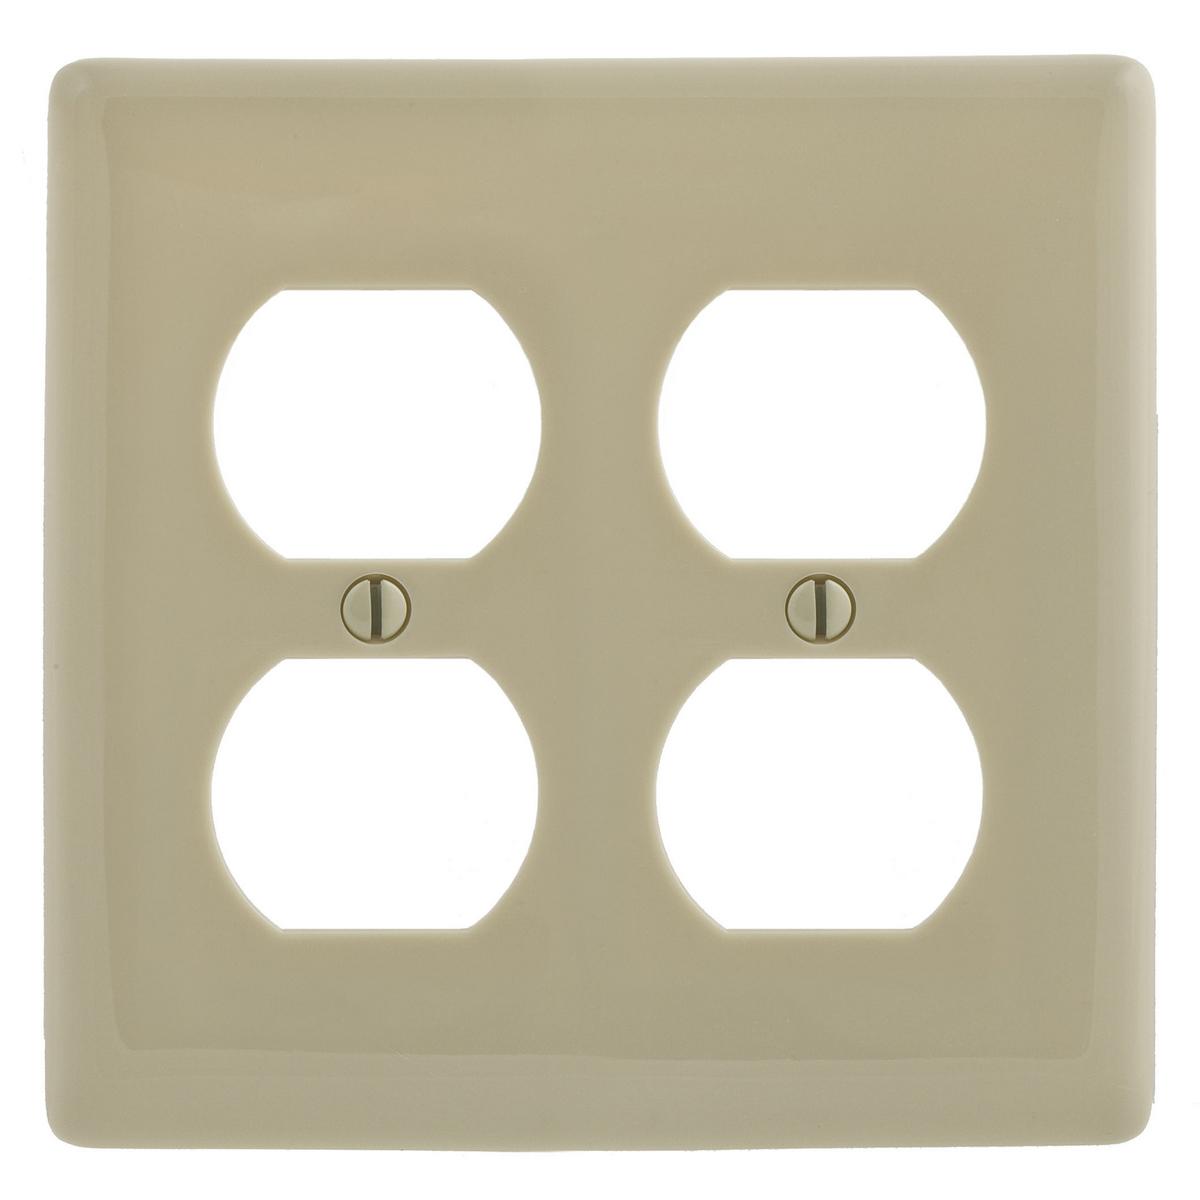 Hubbell NPJ82I Wallplates and Box Covers, Wallplate, Nylon, Mid-Sized, 2-Gang, 2) Duplex, Ivory  ; Reinforcement ribs for extra strength ; Captive screw feature holds mounting screw in place ; High-impact, self-extinguishing nylon material ; Standard Size is 1/8" larger